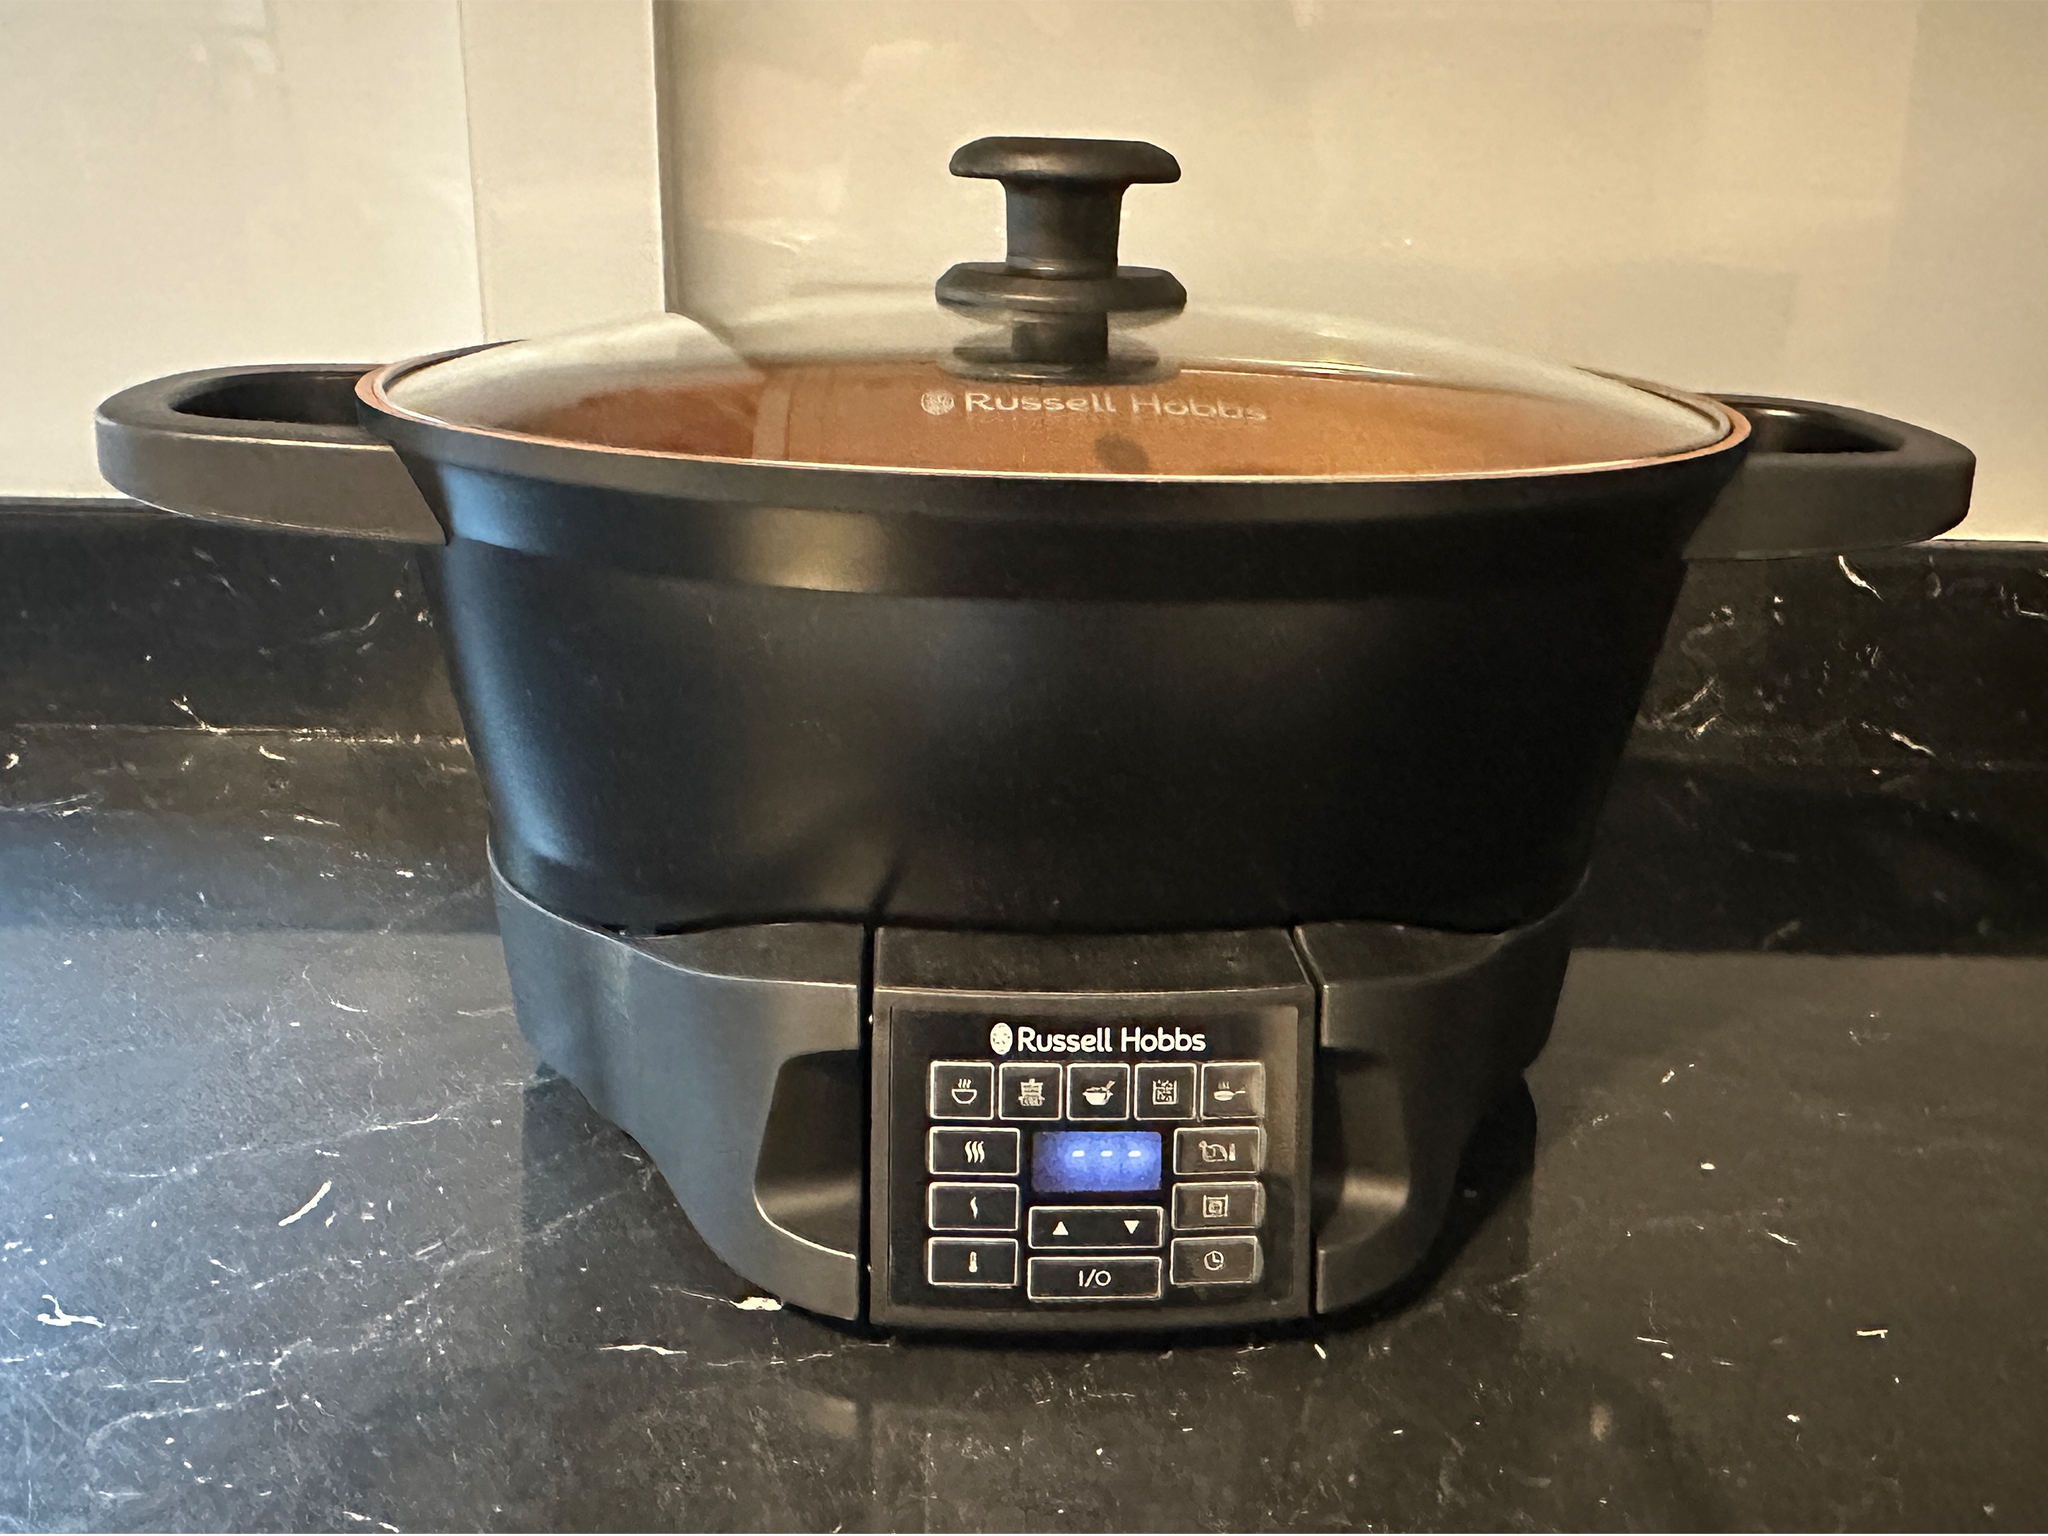 https://static.independent.co.uk/2023/12/04/12/Russell%20Hobbs%20good%20to%20go%20multi-cooker.png